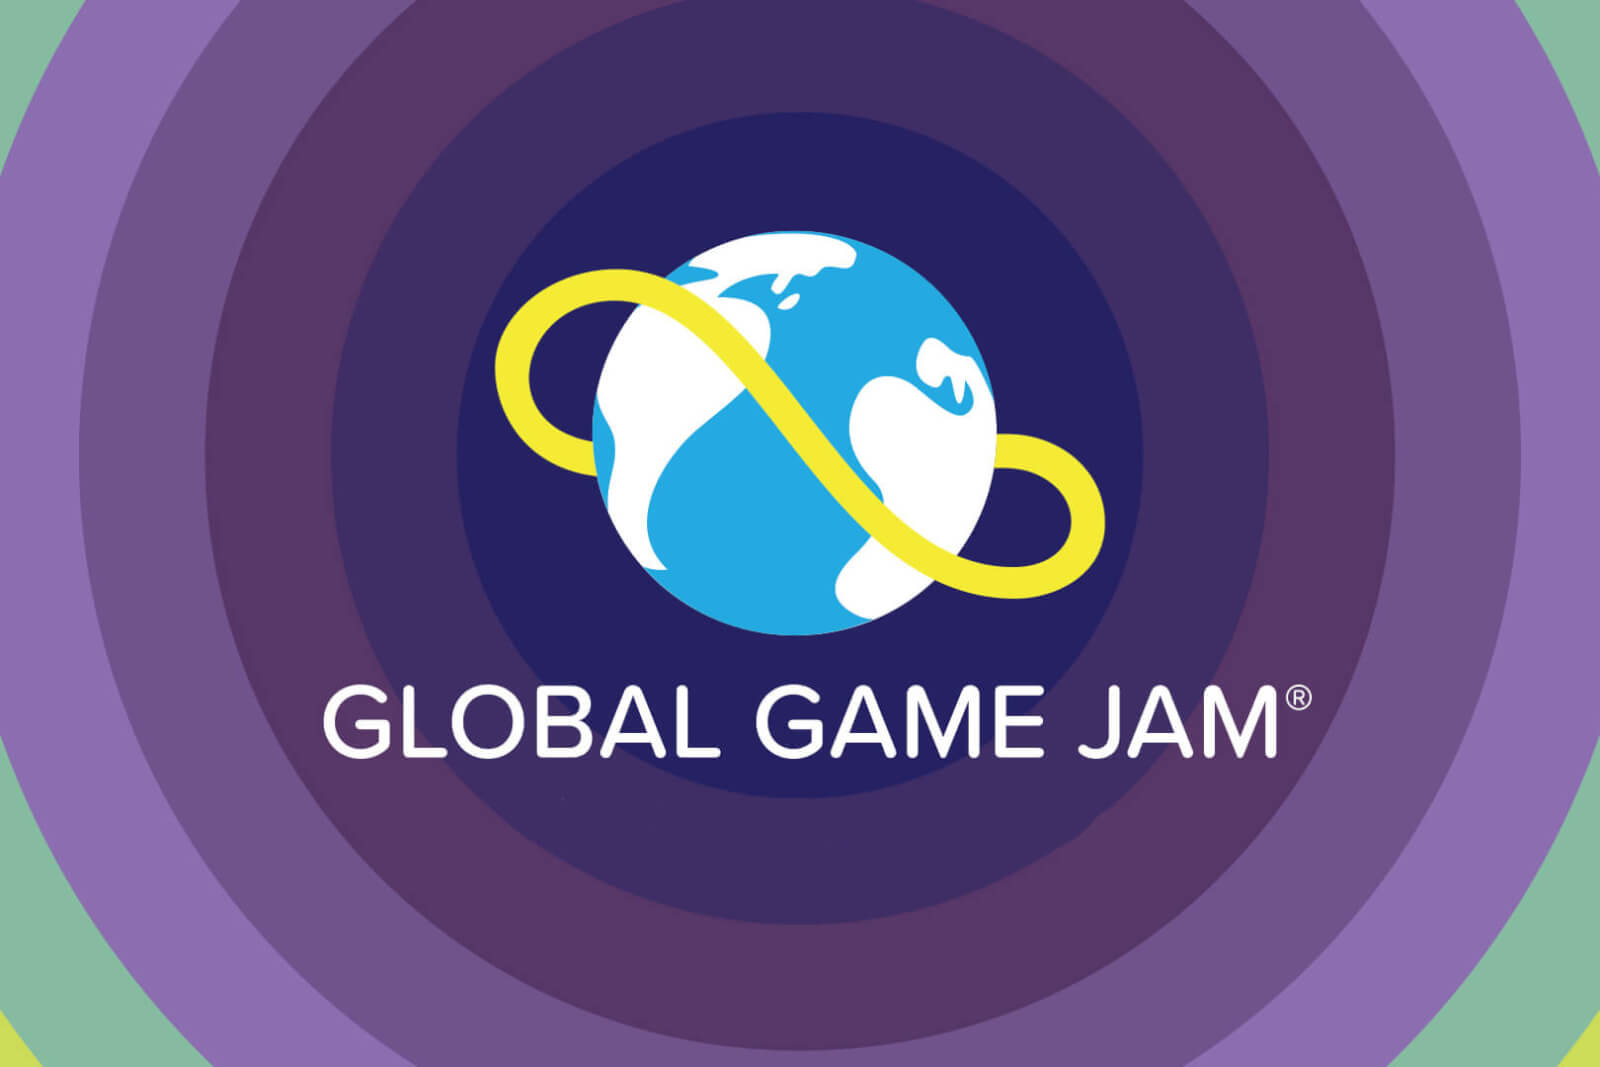 Shenandoah Seeks Participants for Global Game Jam Event Calls On Creative Minds to Come Together to Build Games